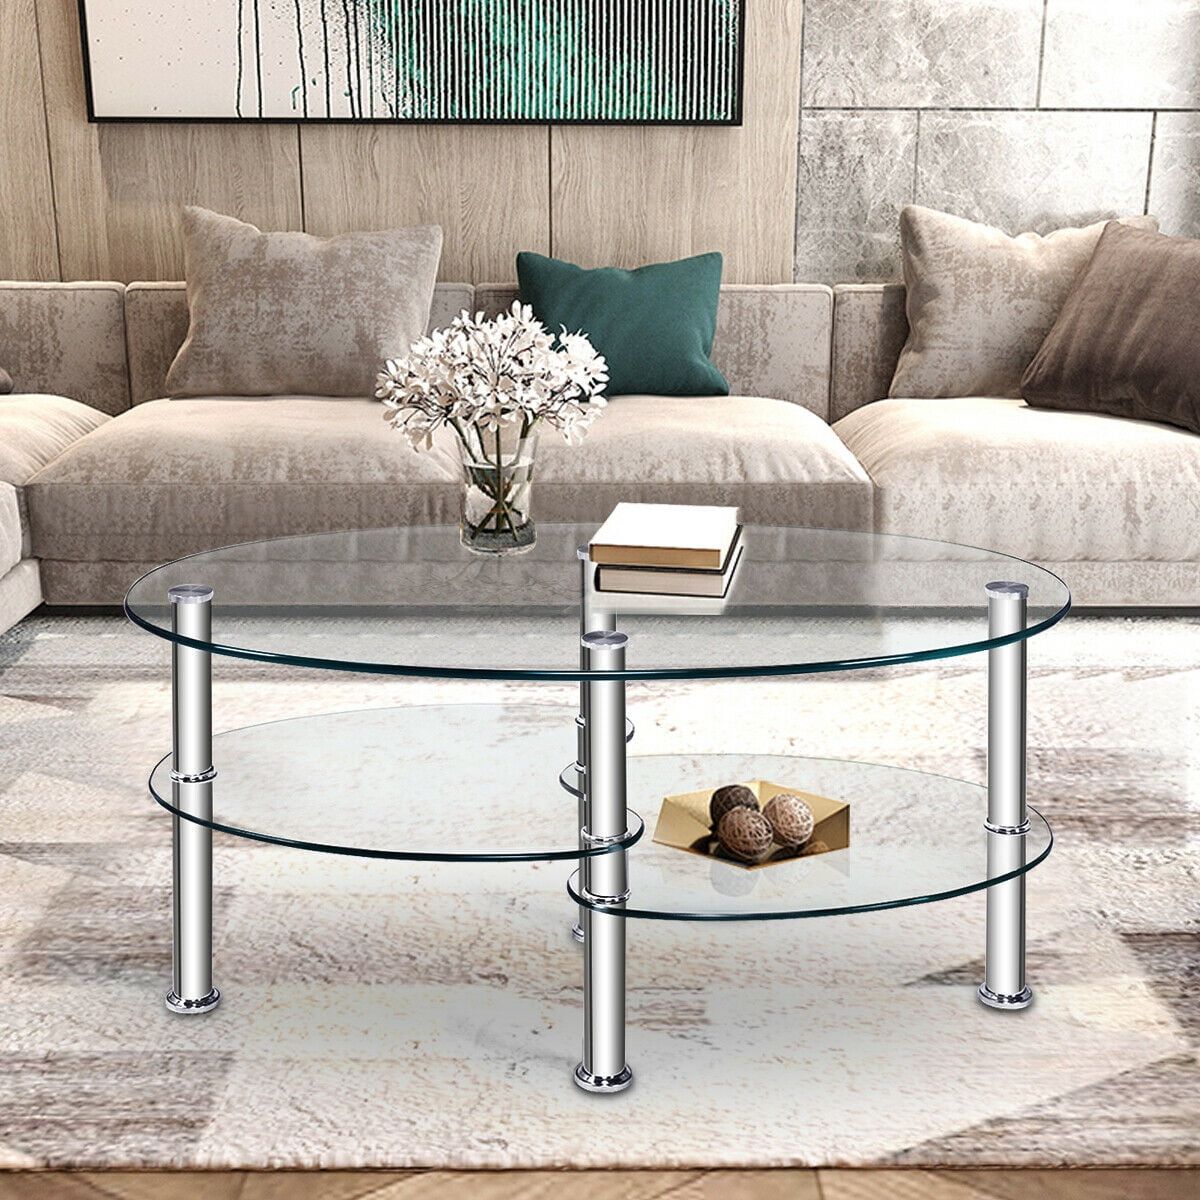 Costway Tempered Glass Oval Side Coffee Table Shelf Chrome Base Living Throughout Tempered Glass Oval Side Tables (Gallery 1 of 20)